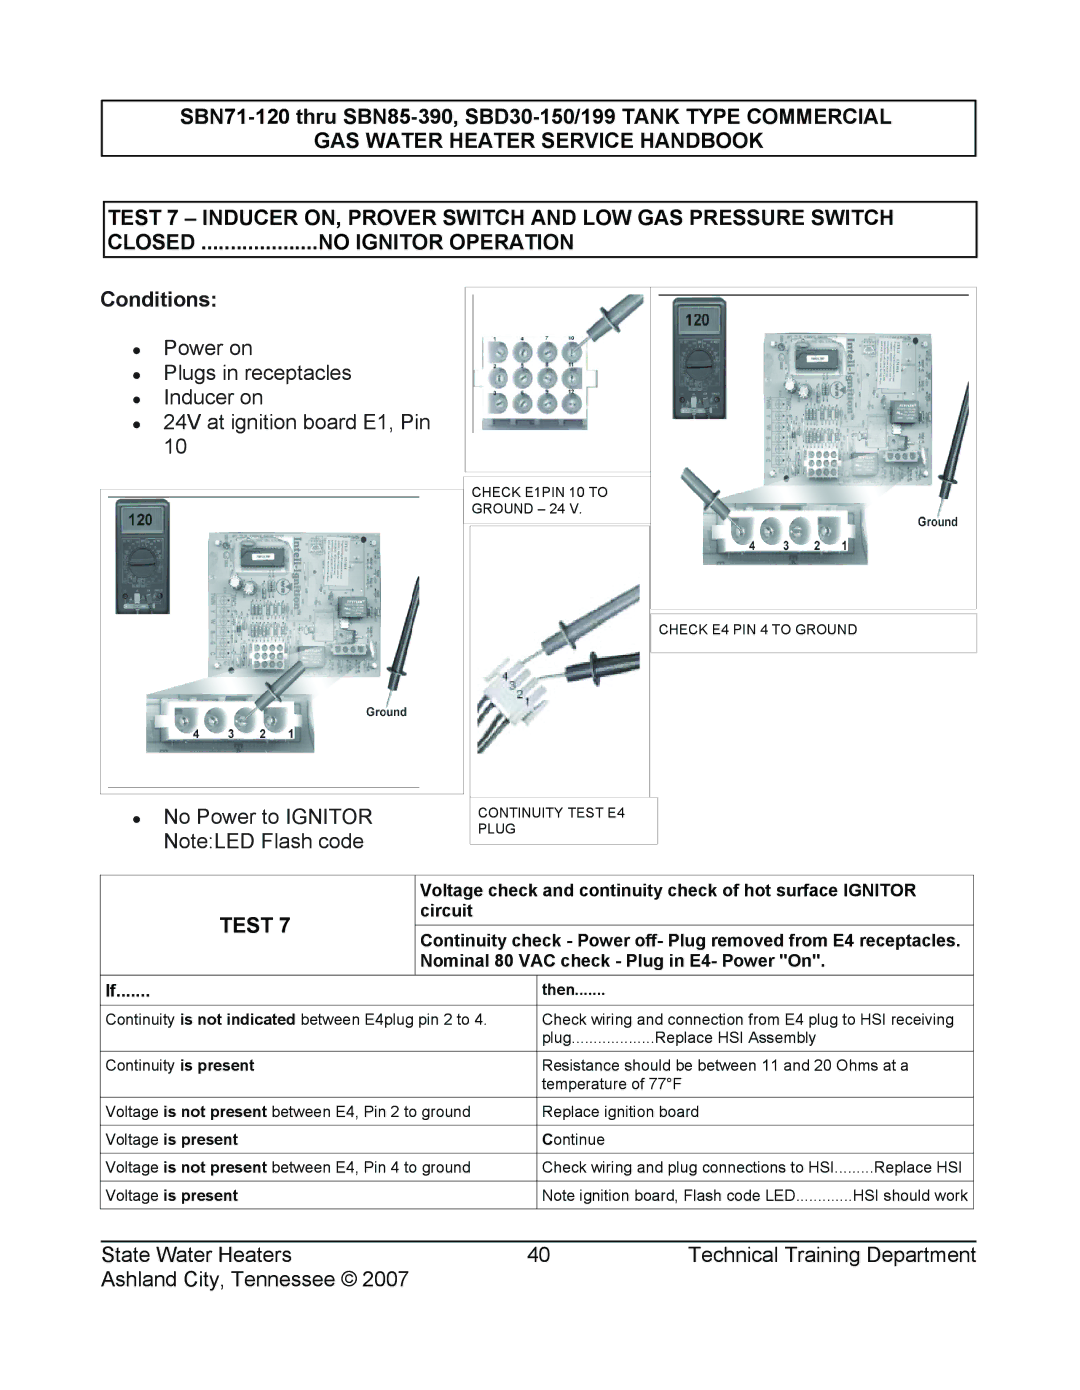 State Industries SBN85 390 (A), SBD30 150, SBN71 120, SBD30 199, SERIES 108 manual No Ignitor Operation 